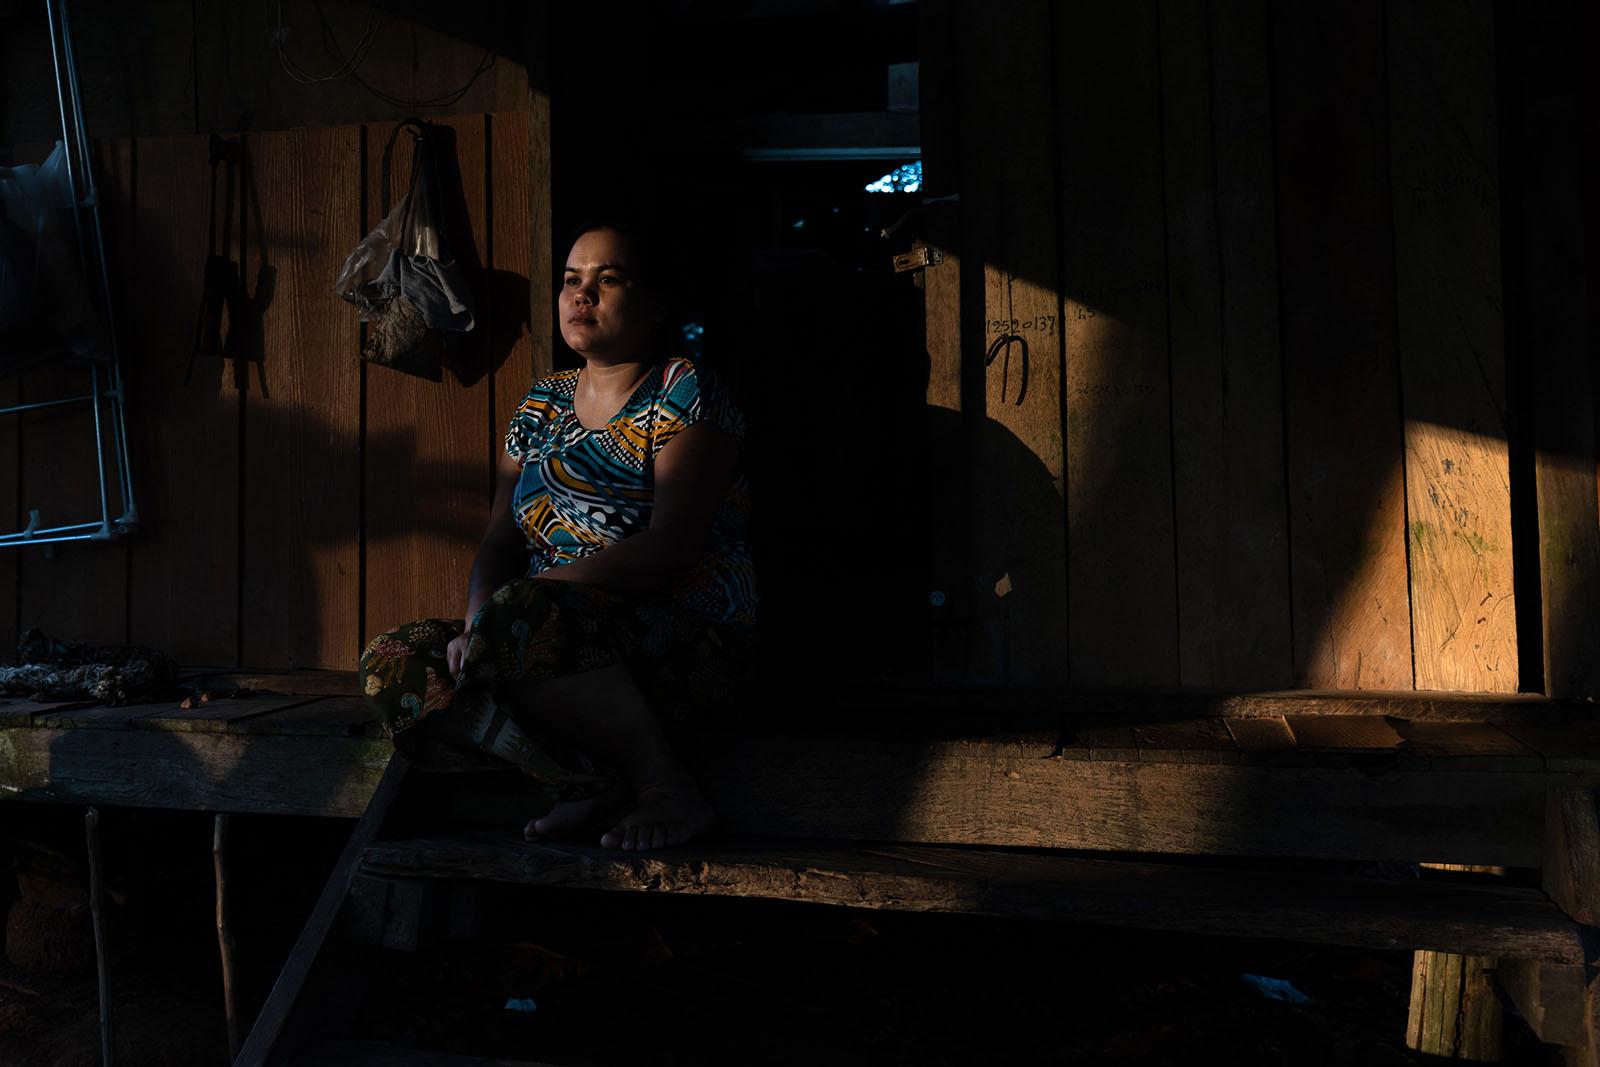 LIFE ON THE OTHER SIDE - Surat Thani - Mithae Mar, a rubber tapper, sits outside...